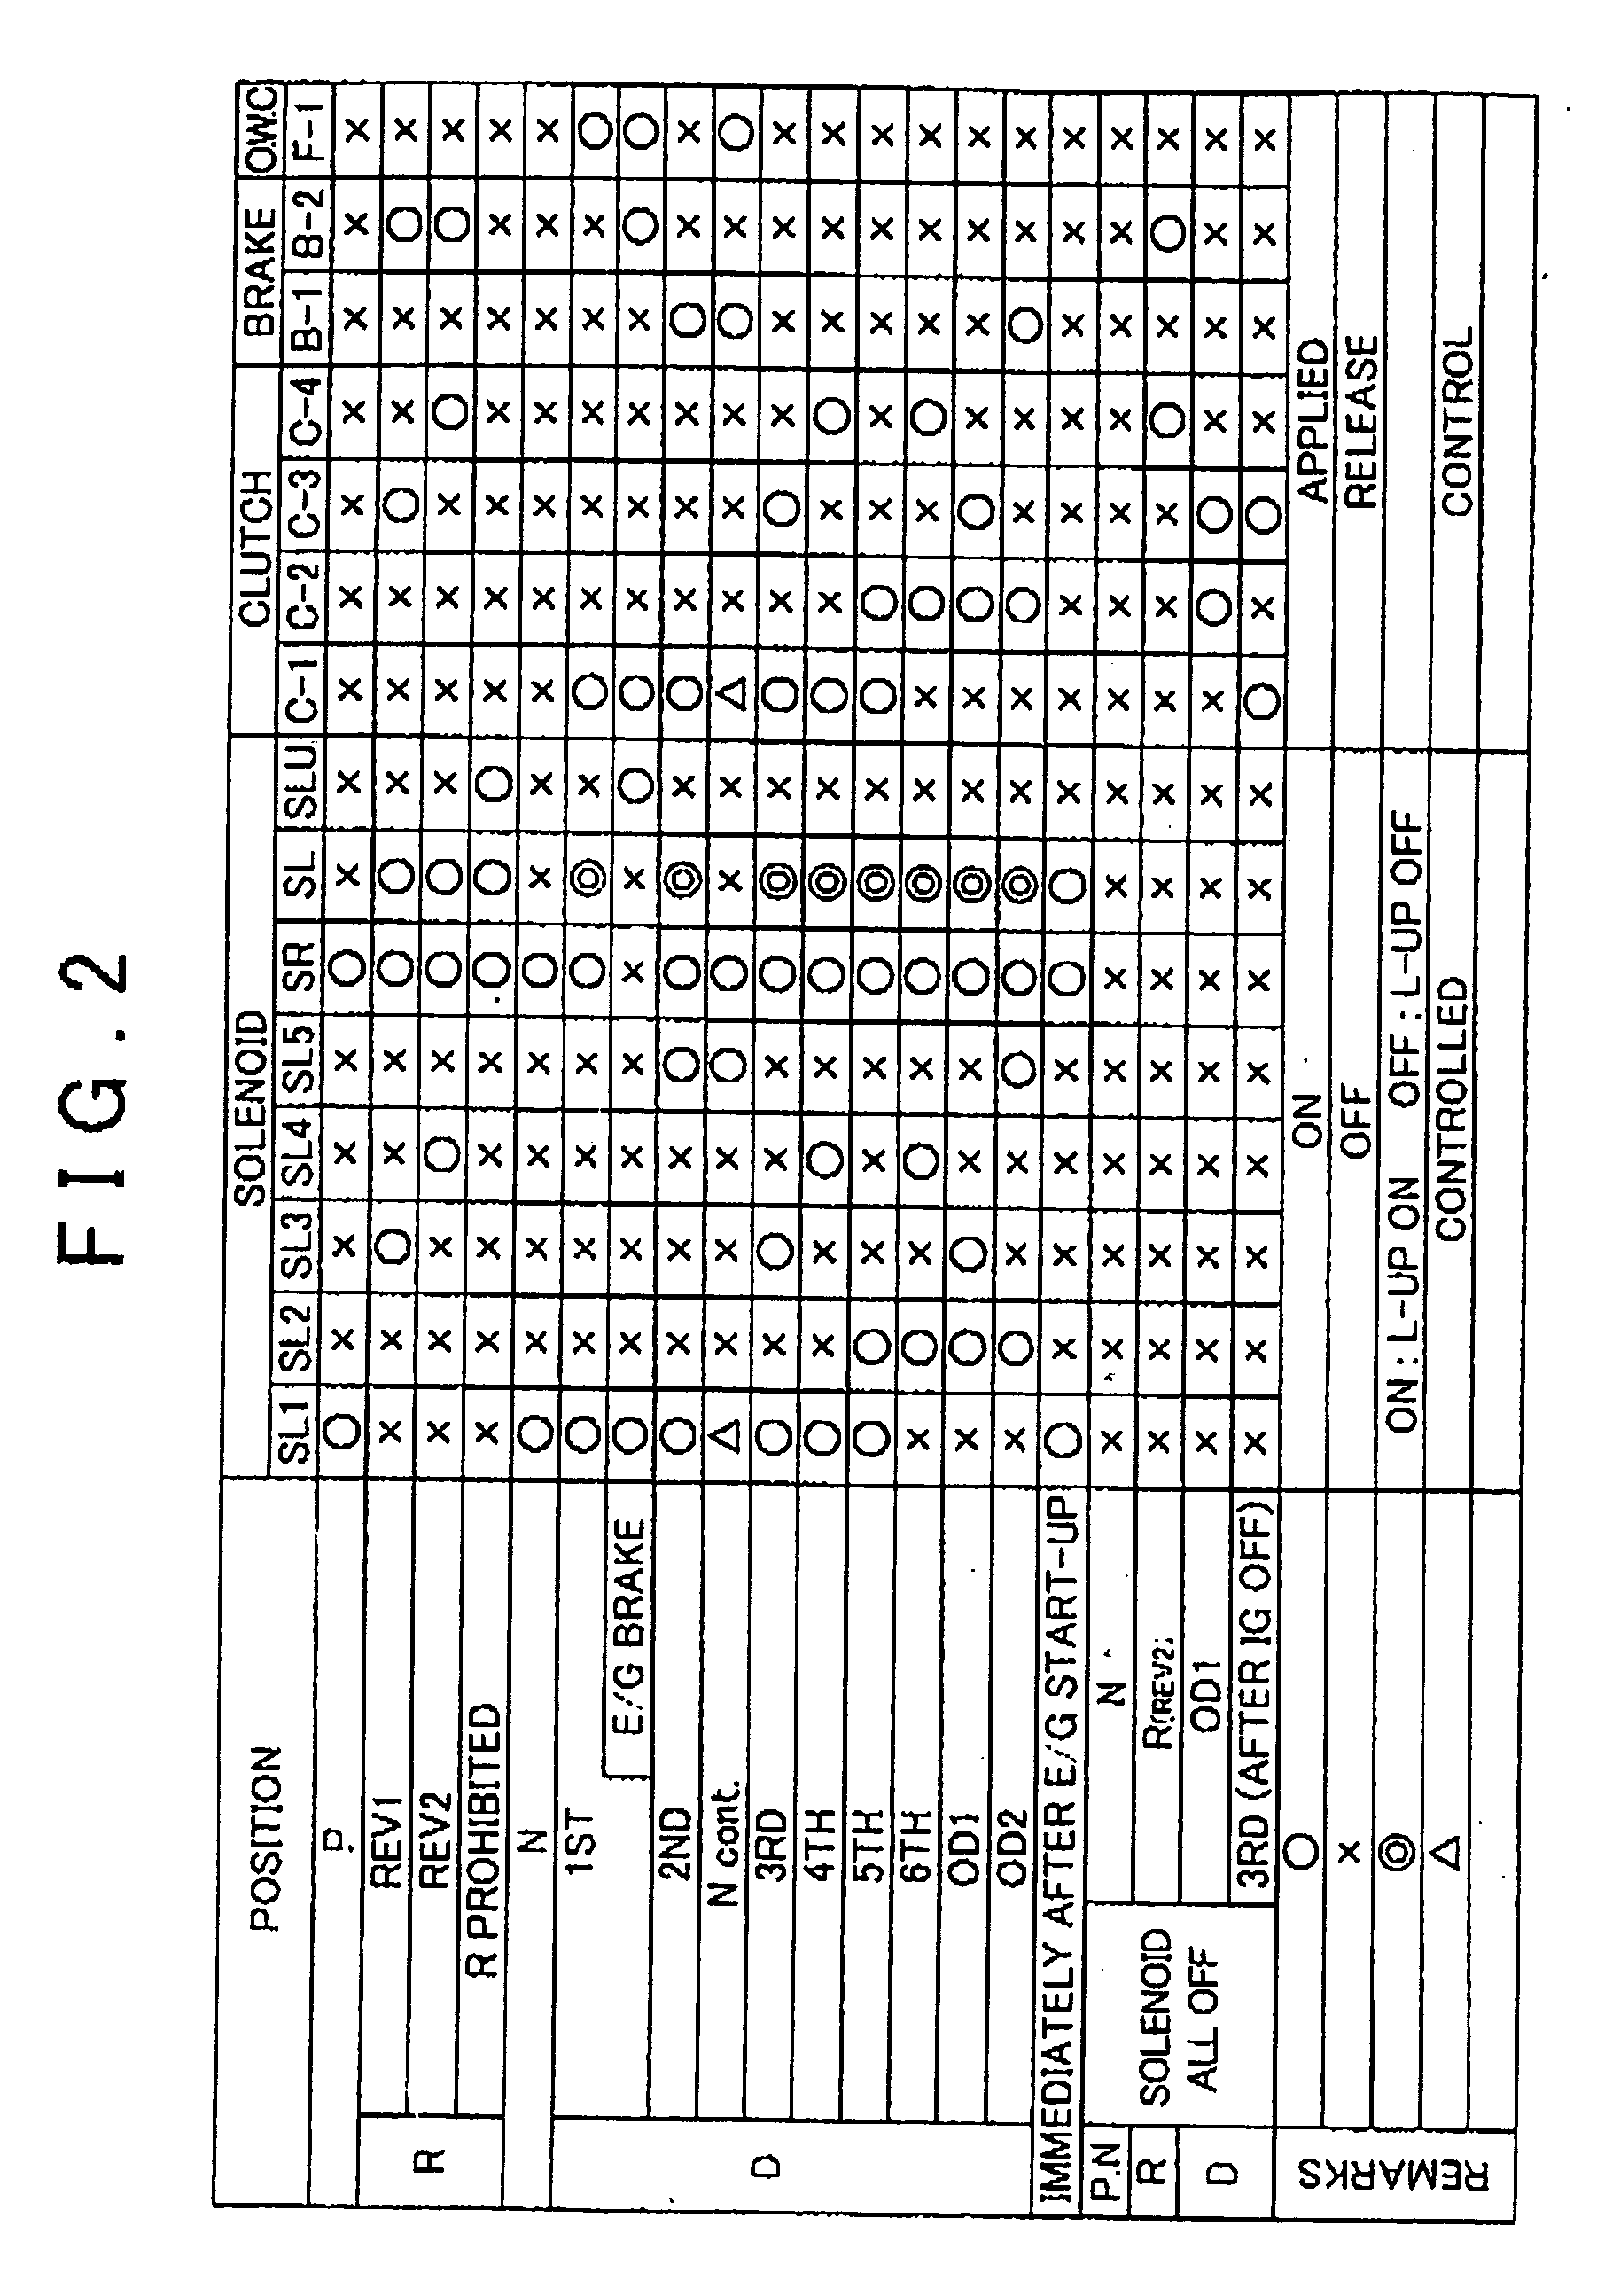 Hydraulic control apparatus for an automatic transmission